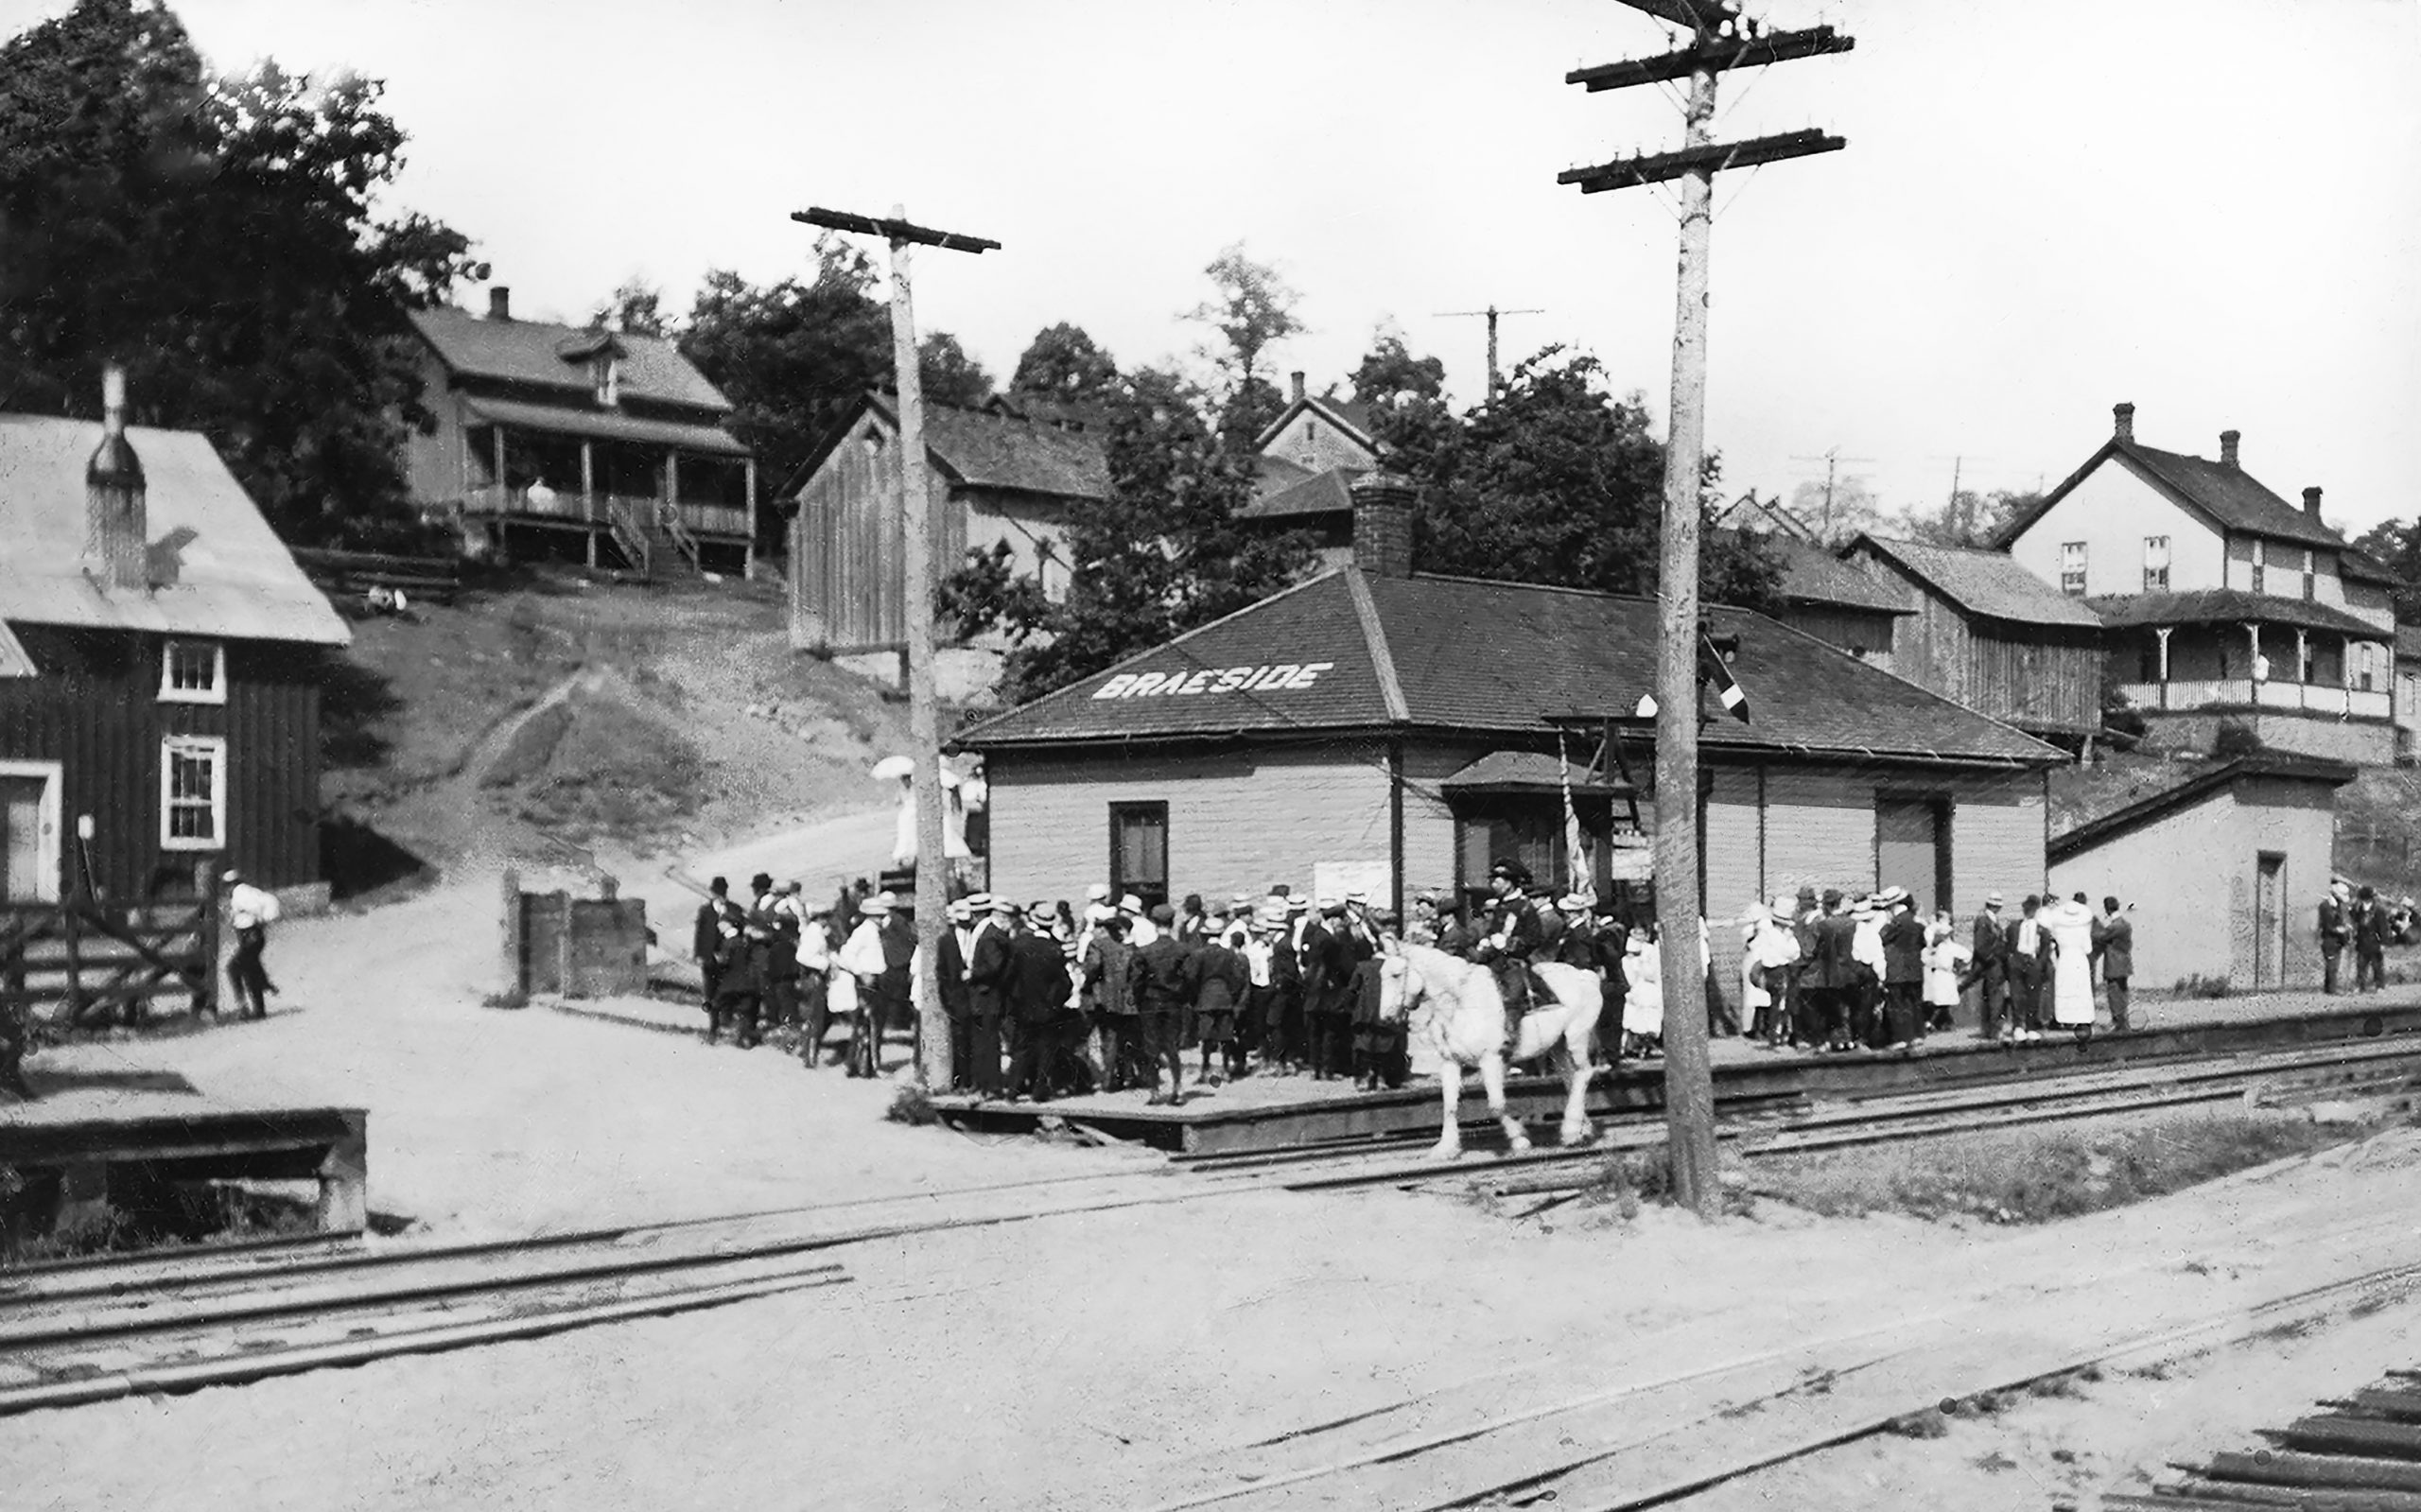 A crowd at the Braeside Train Station watches an Orangeman’s Parade led by a man on a white horse.